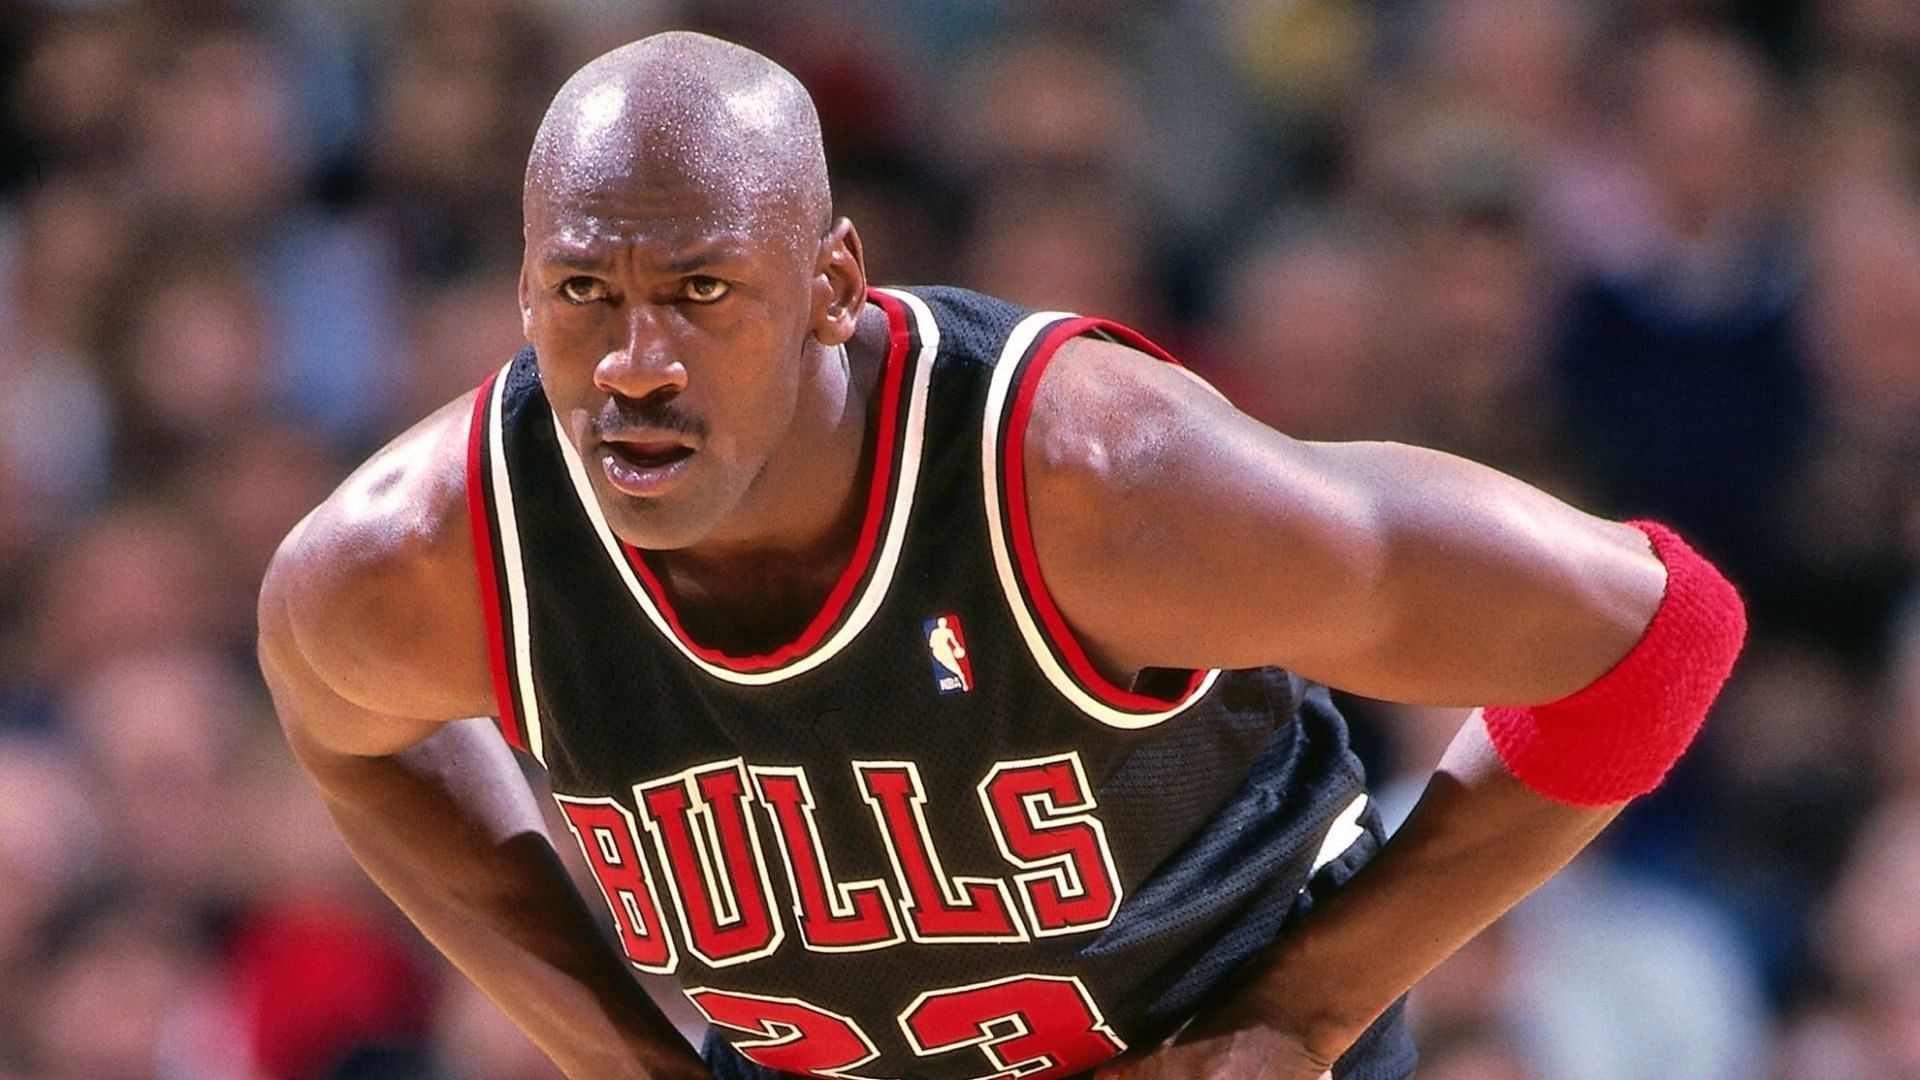 Michael Jordan relentlessly demanded to play when humanly possible. [Photo: MARCA]